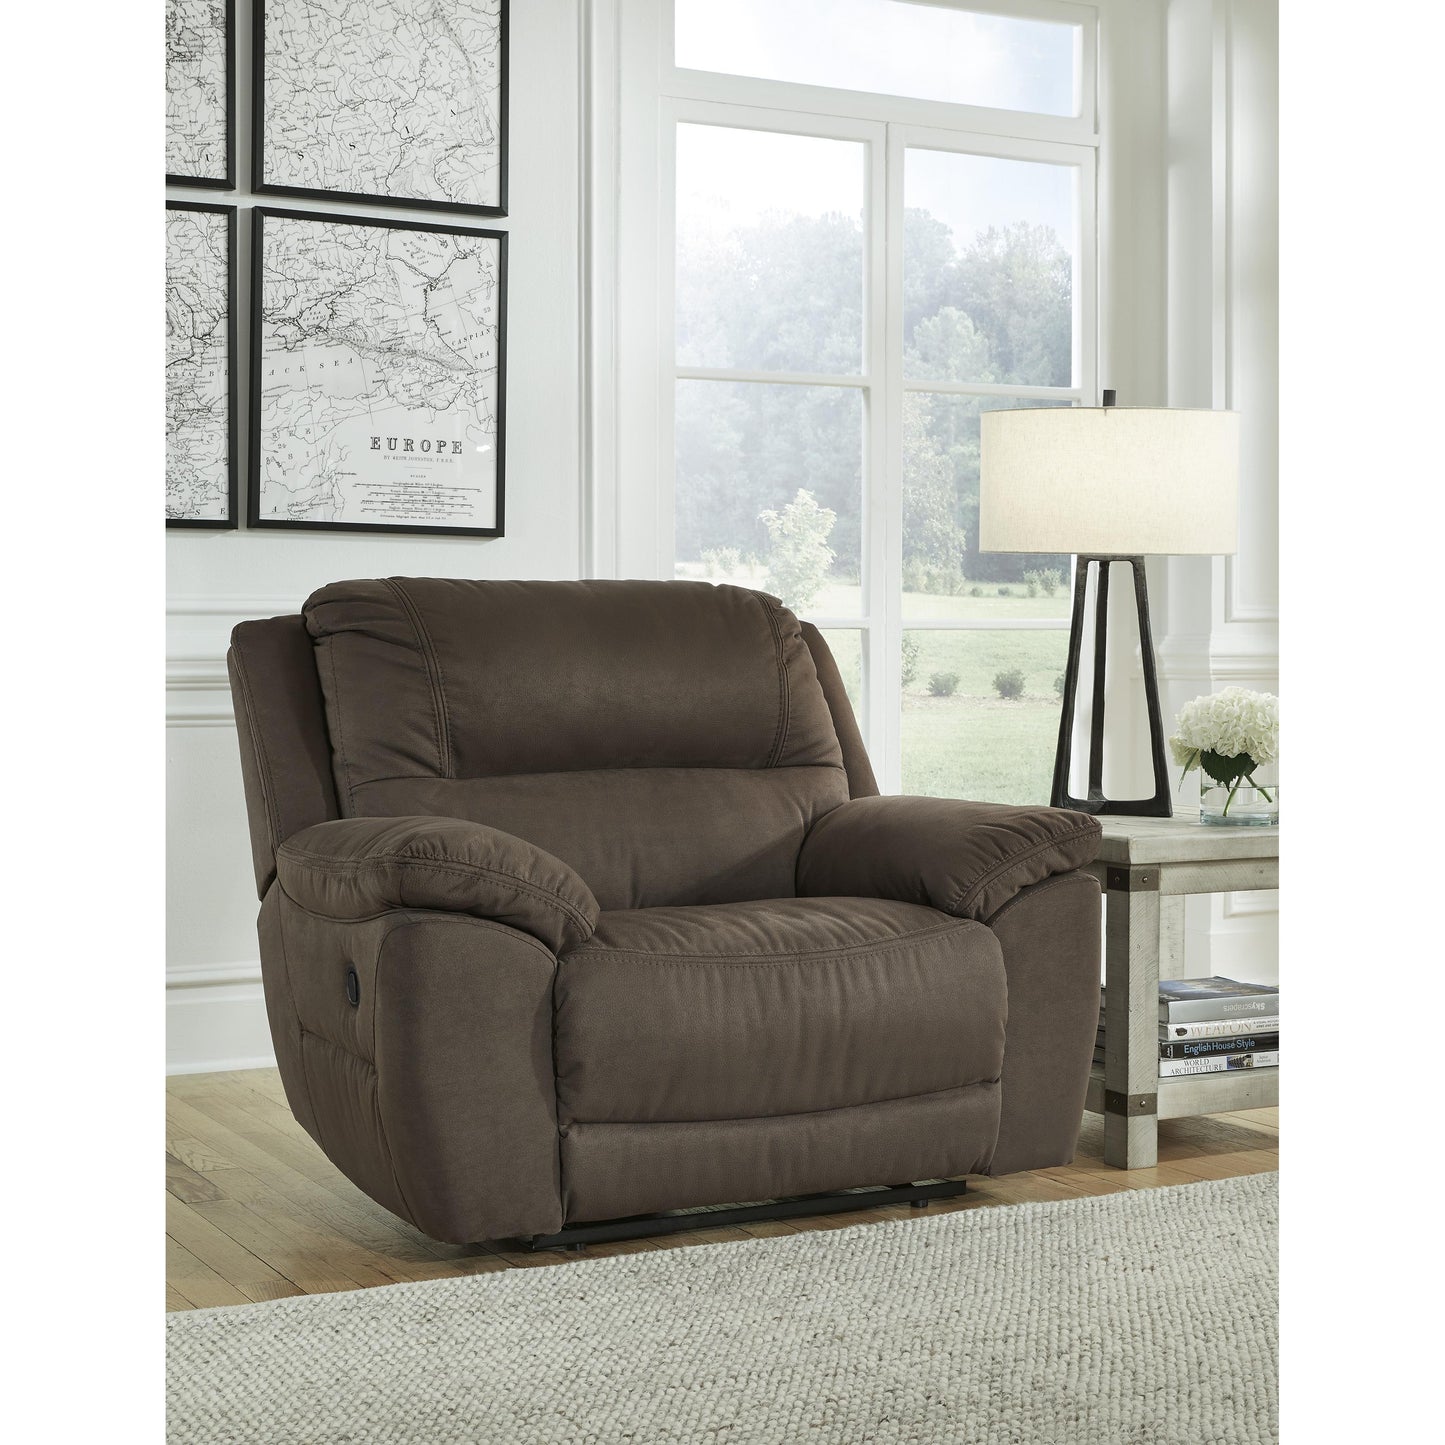 Signature Design by Ashley Next-Gen Gaucho Leather Look Recliner with Wall Recline 5420452 IMAGE 6